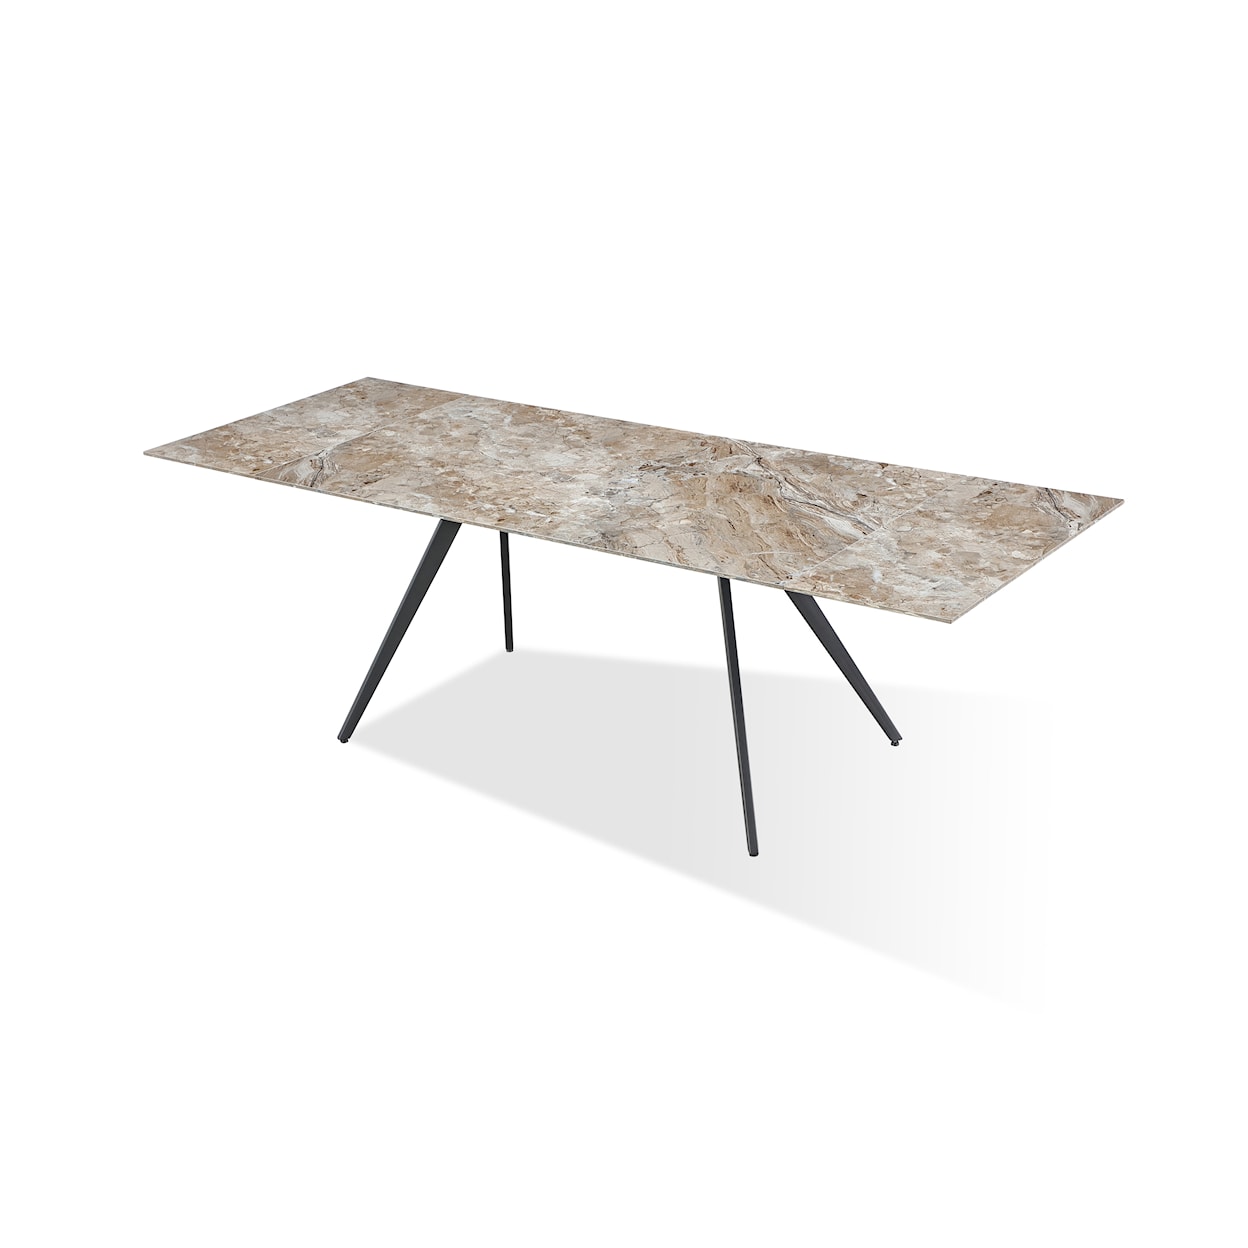 Modus International Lucia Double Ext Stone Top Metal Leg Dining Table